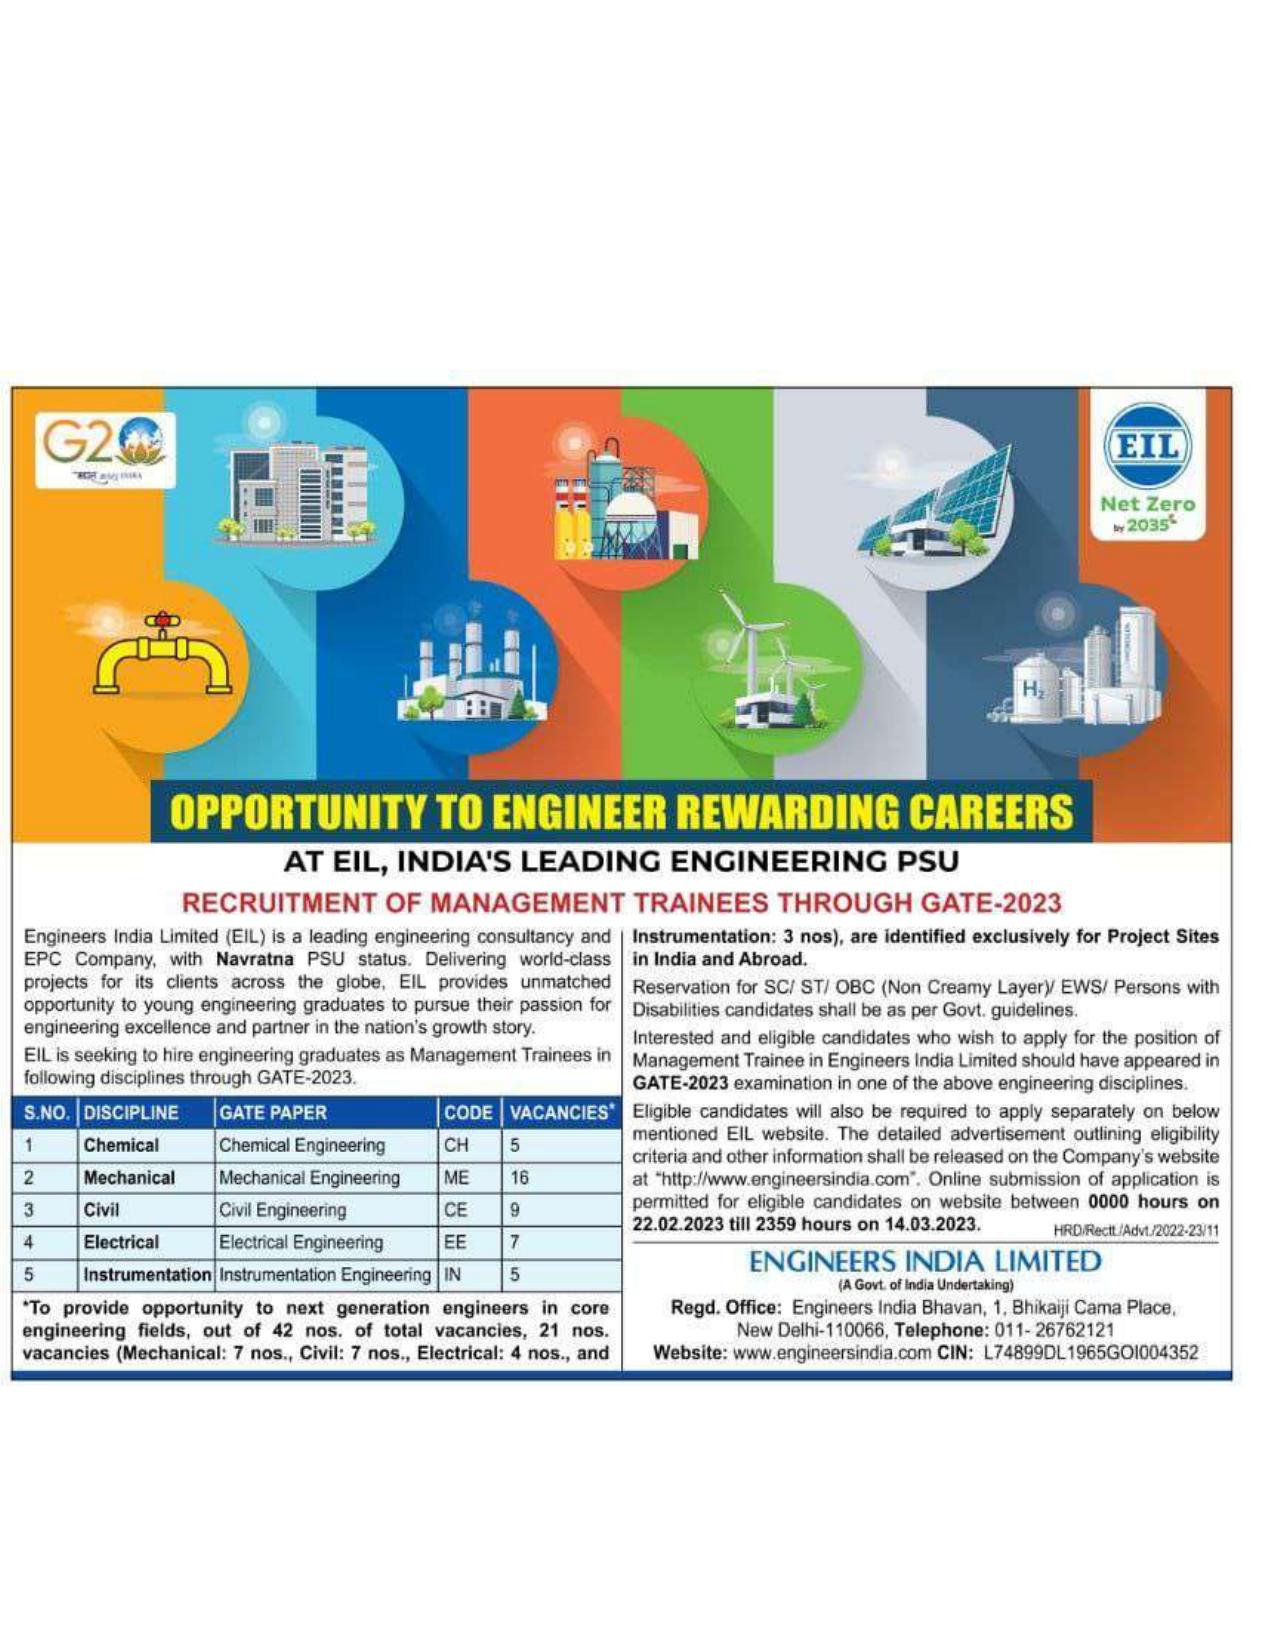 Engineers India Limited (EIL) Management Trainee (MT) Recruitment 2023 - Page 1